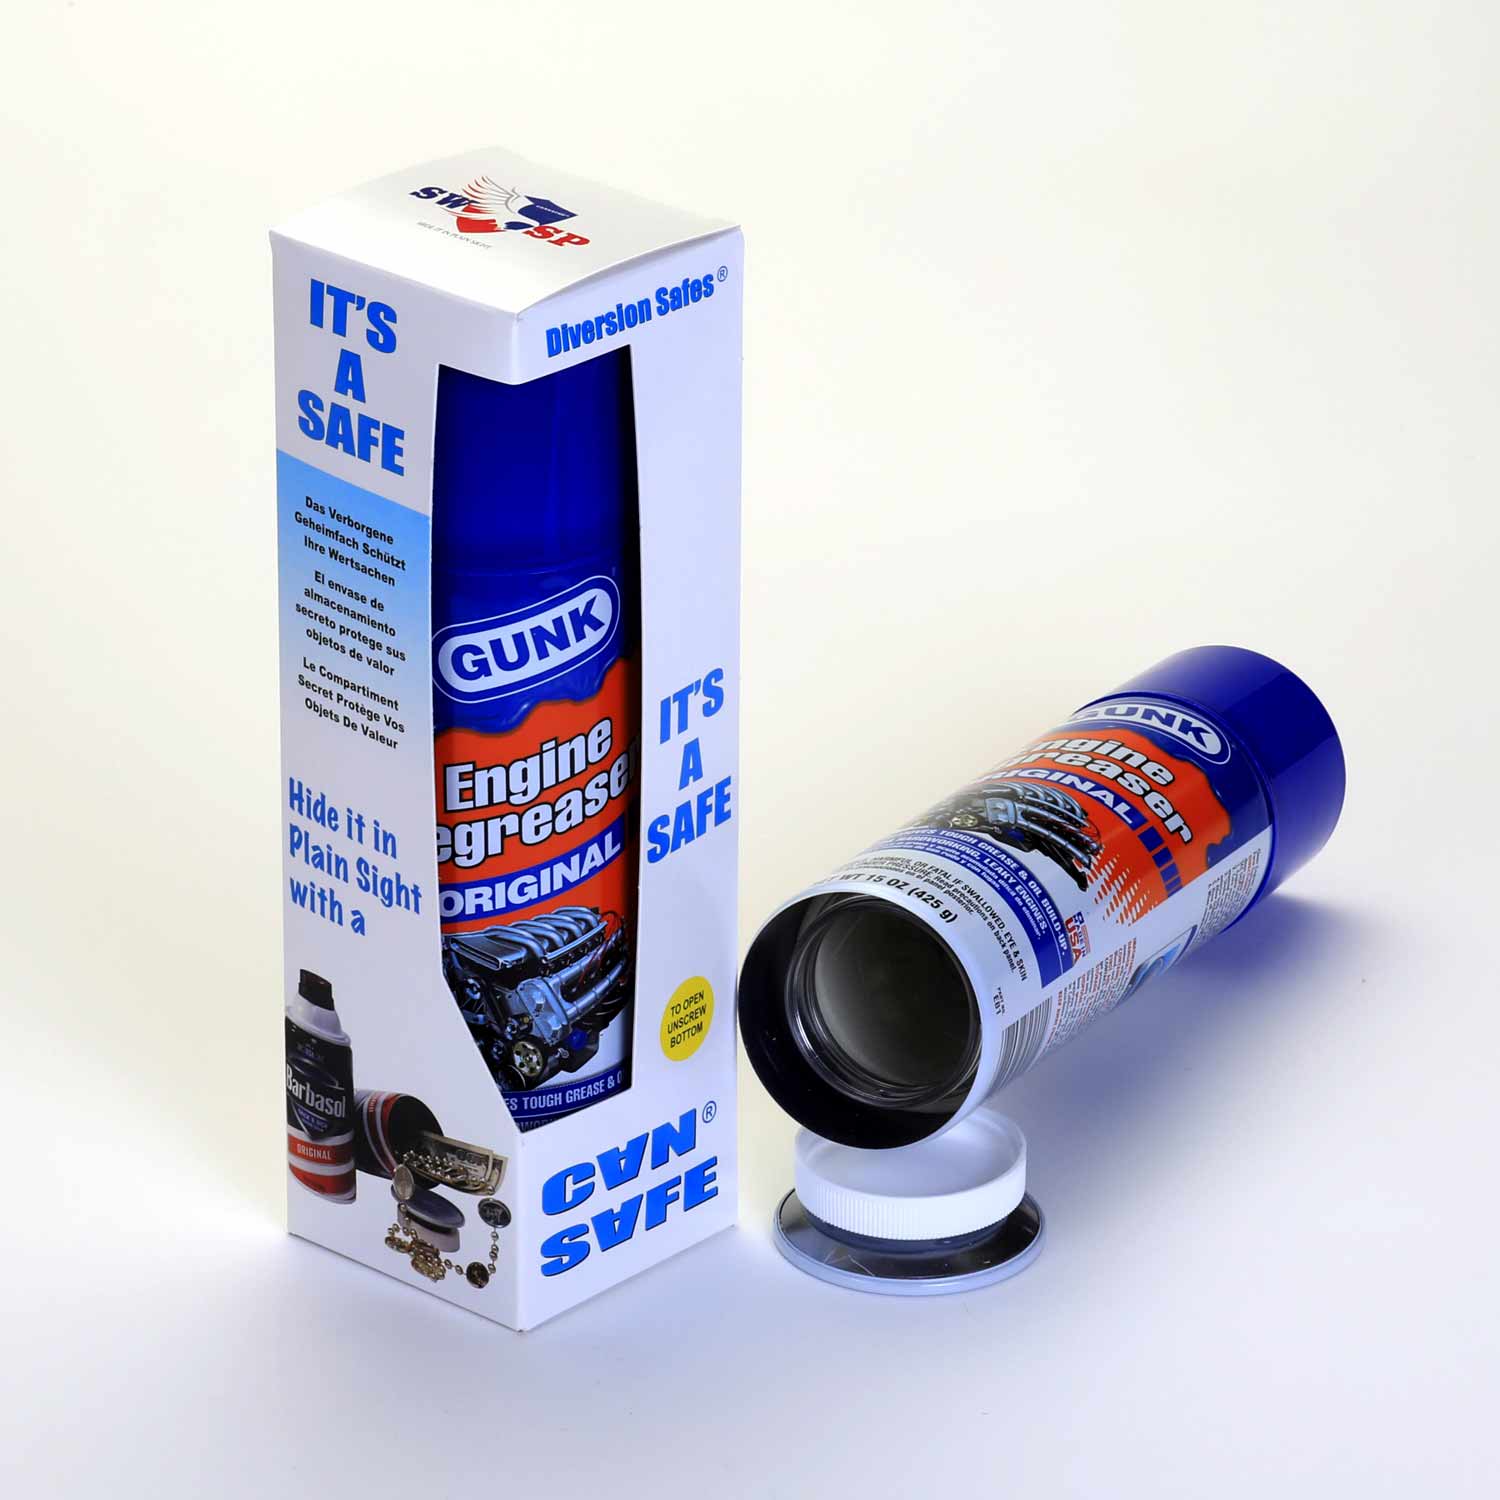 GUNK Engine Brite Degreaser - Diversion Can Safe - Southwest Specialty  Products: Your Home Security and Diversion Can Safe Manufacturing Experts